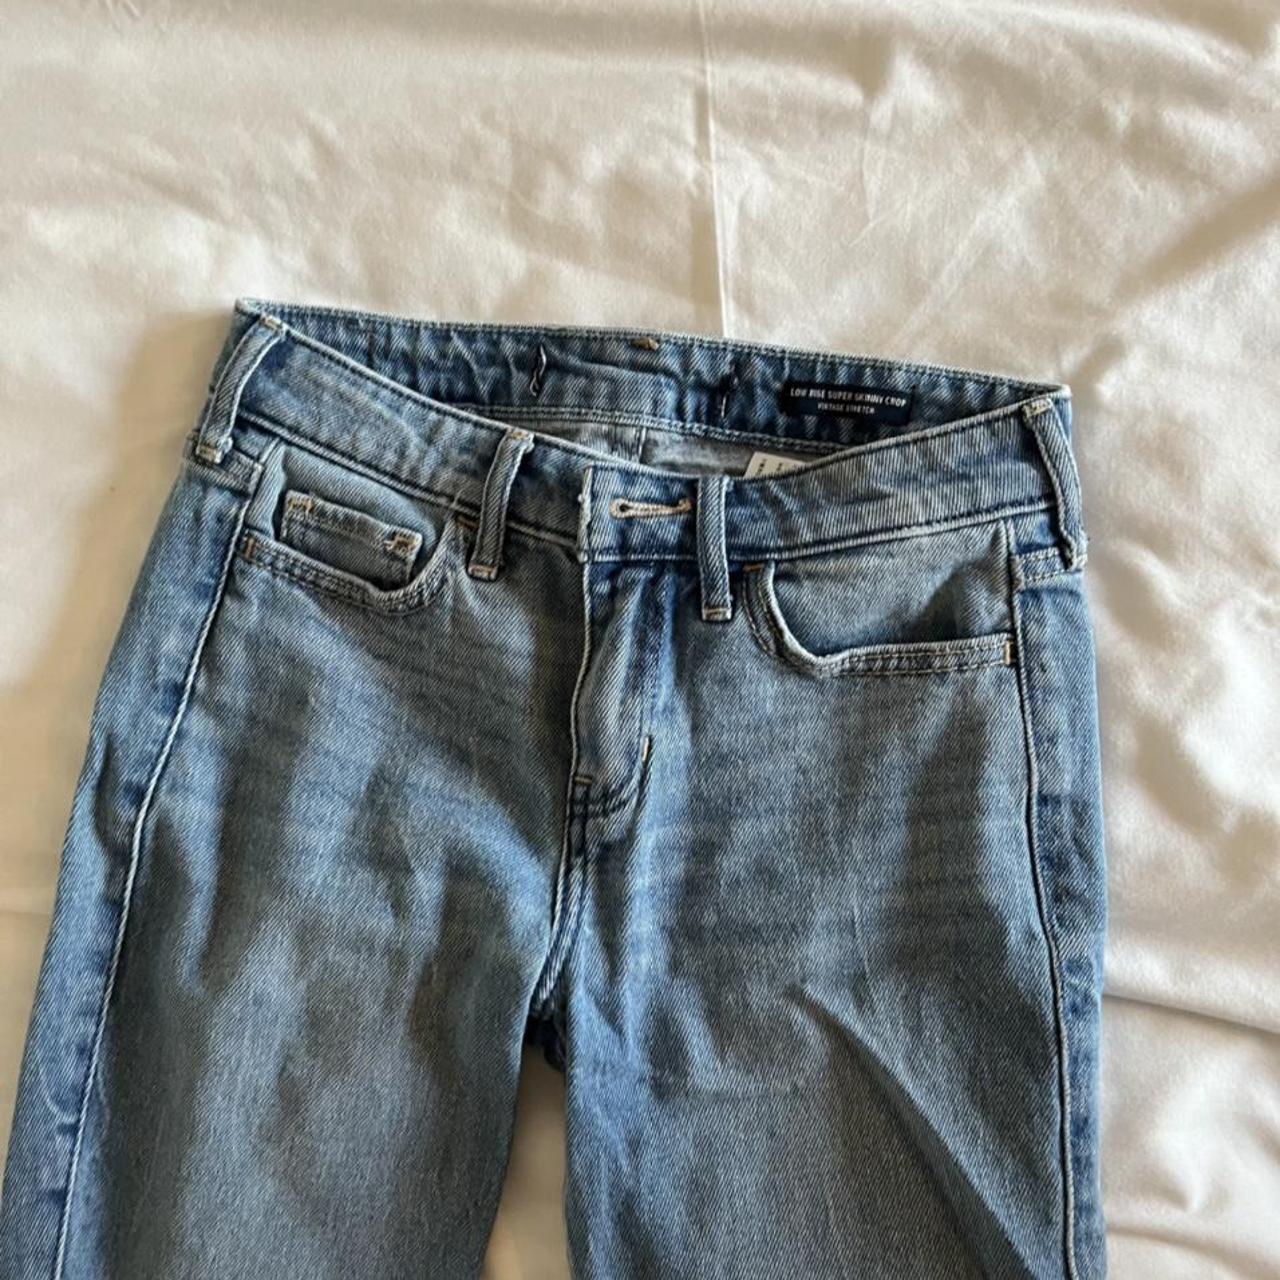 Product Image 2 - Low rise skinny jeans, hollister